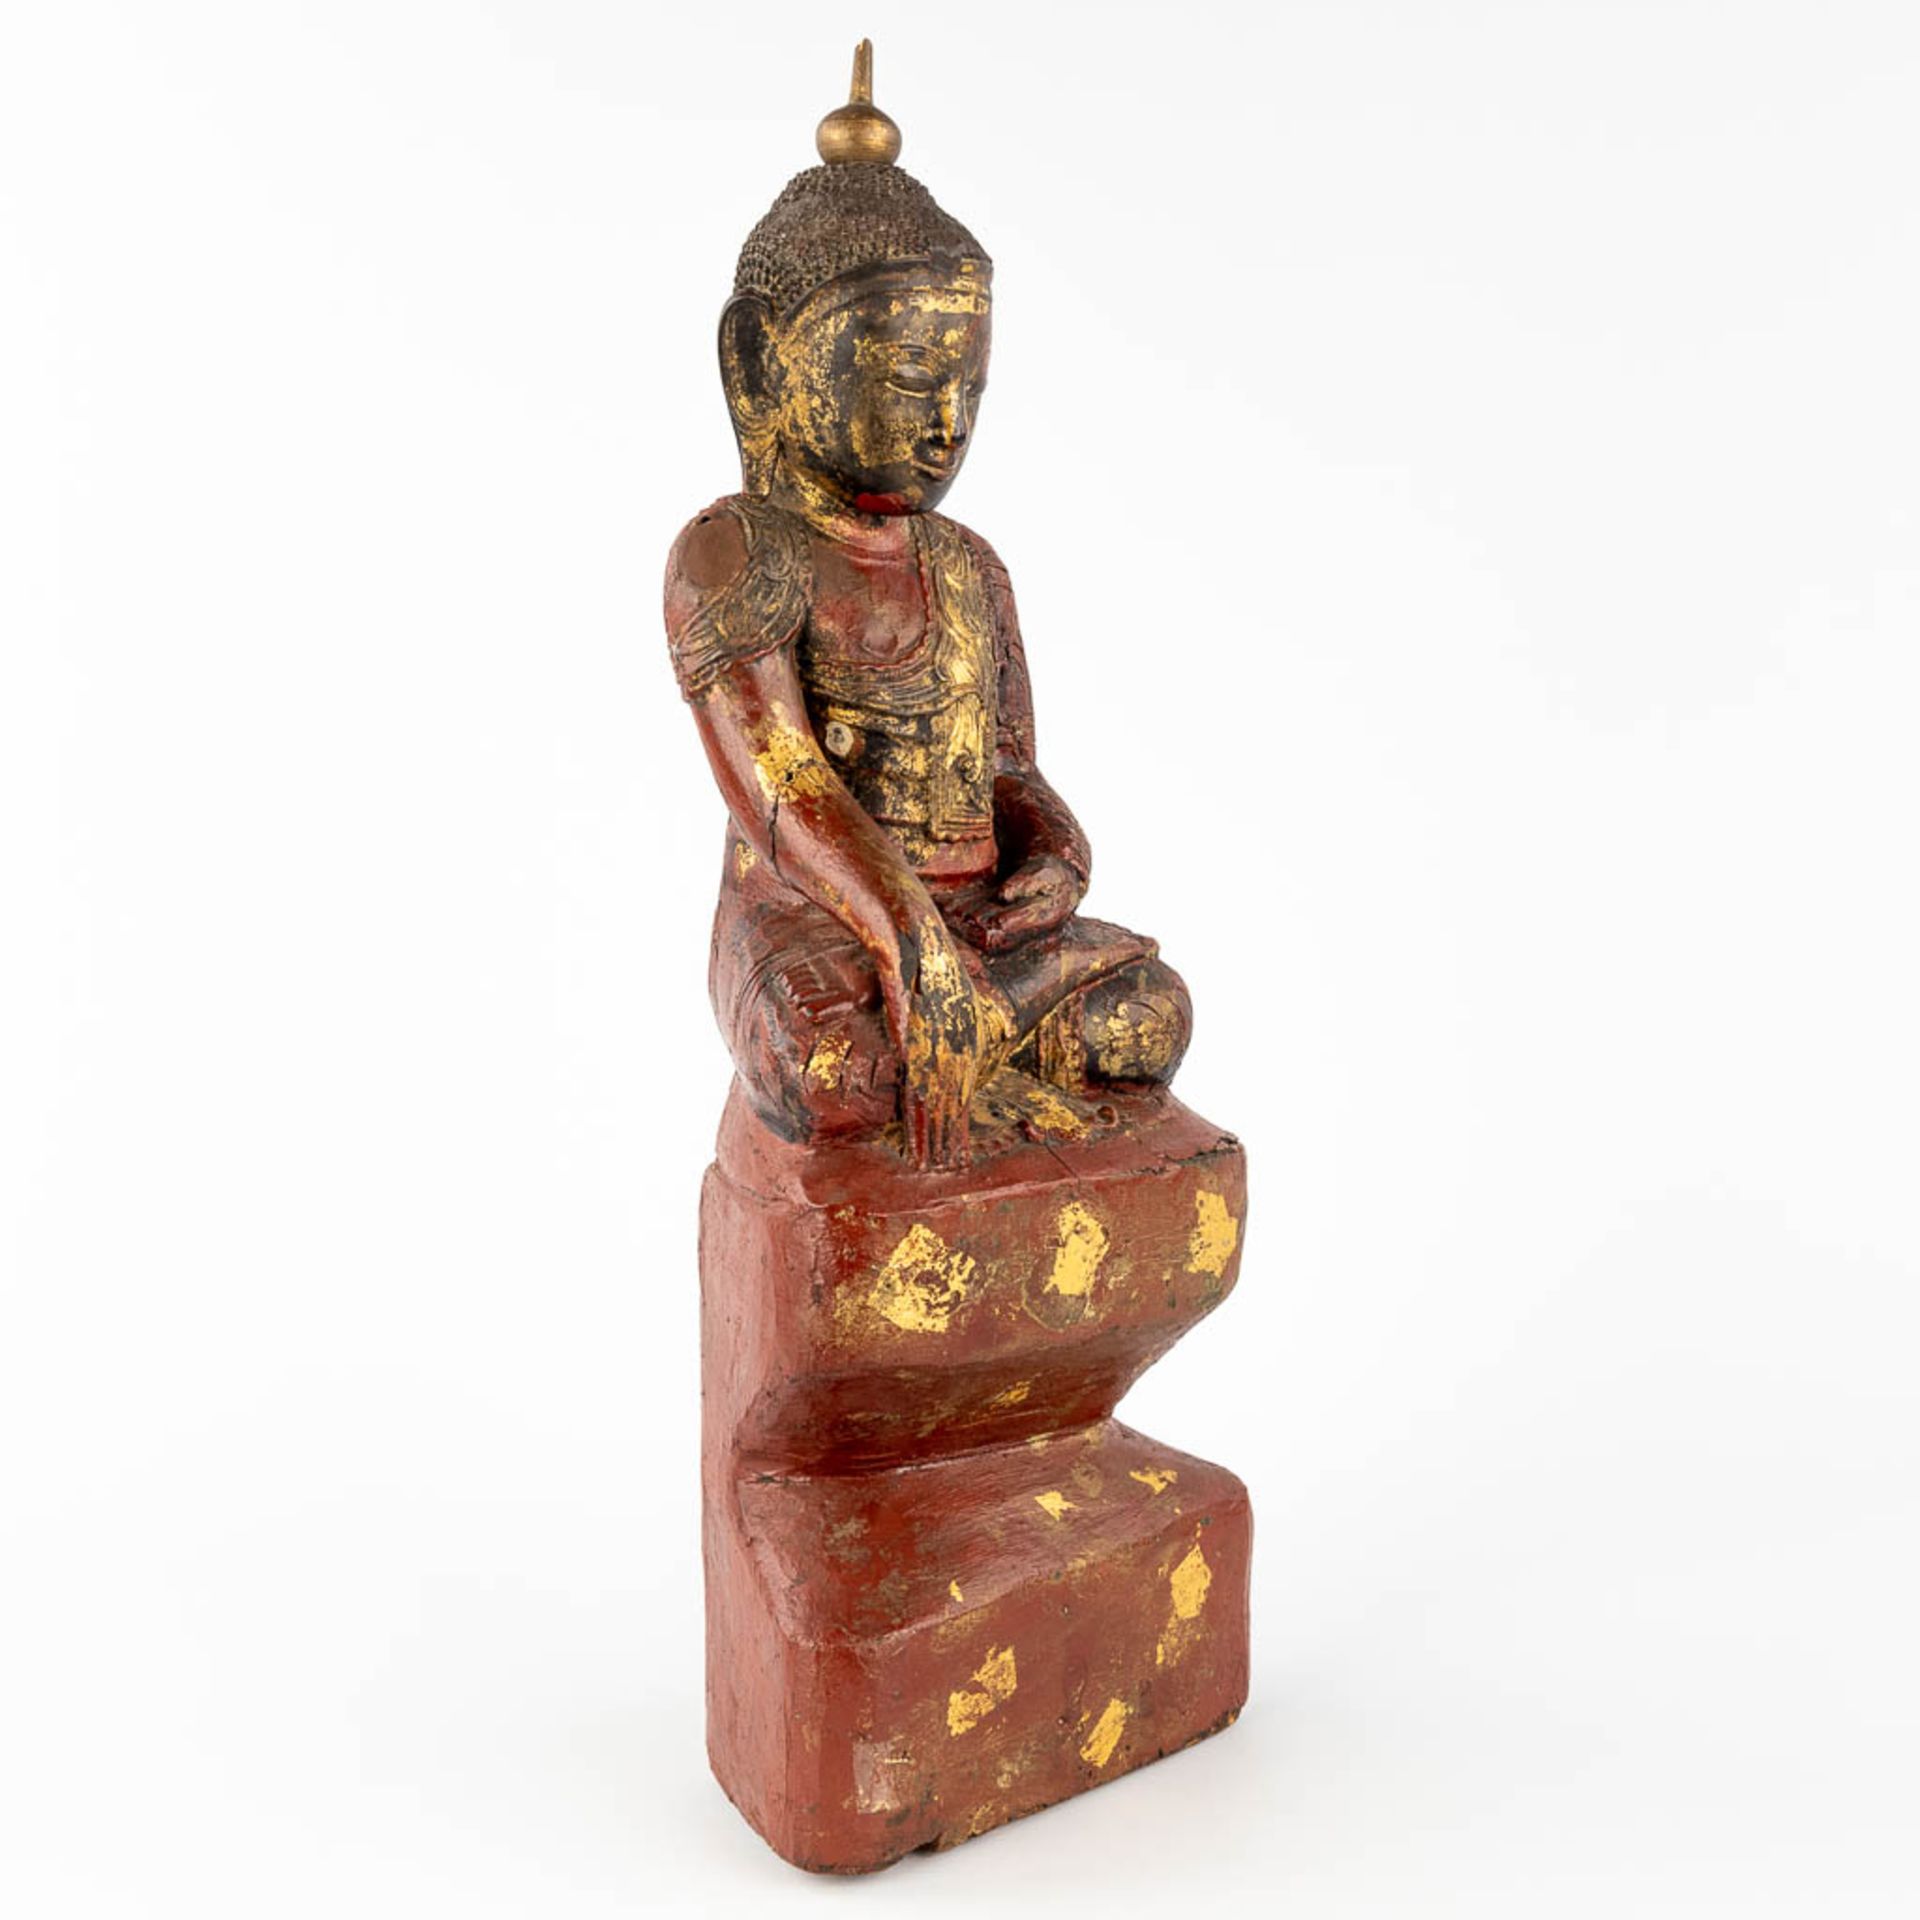 A collection of two wood-sculptured buddha statues, 19th/20th C. (W: 29 x H: 60 cm) - Image 15 of 27